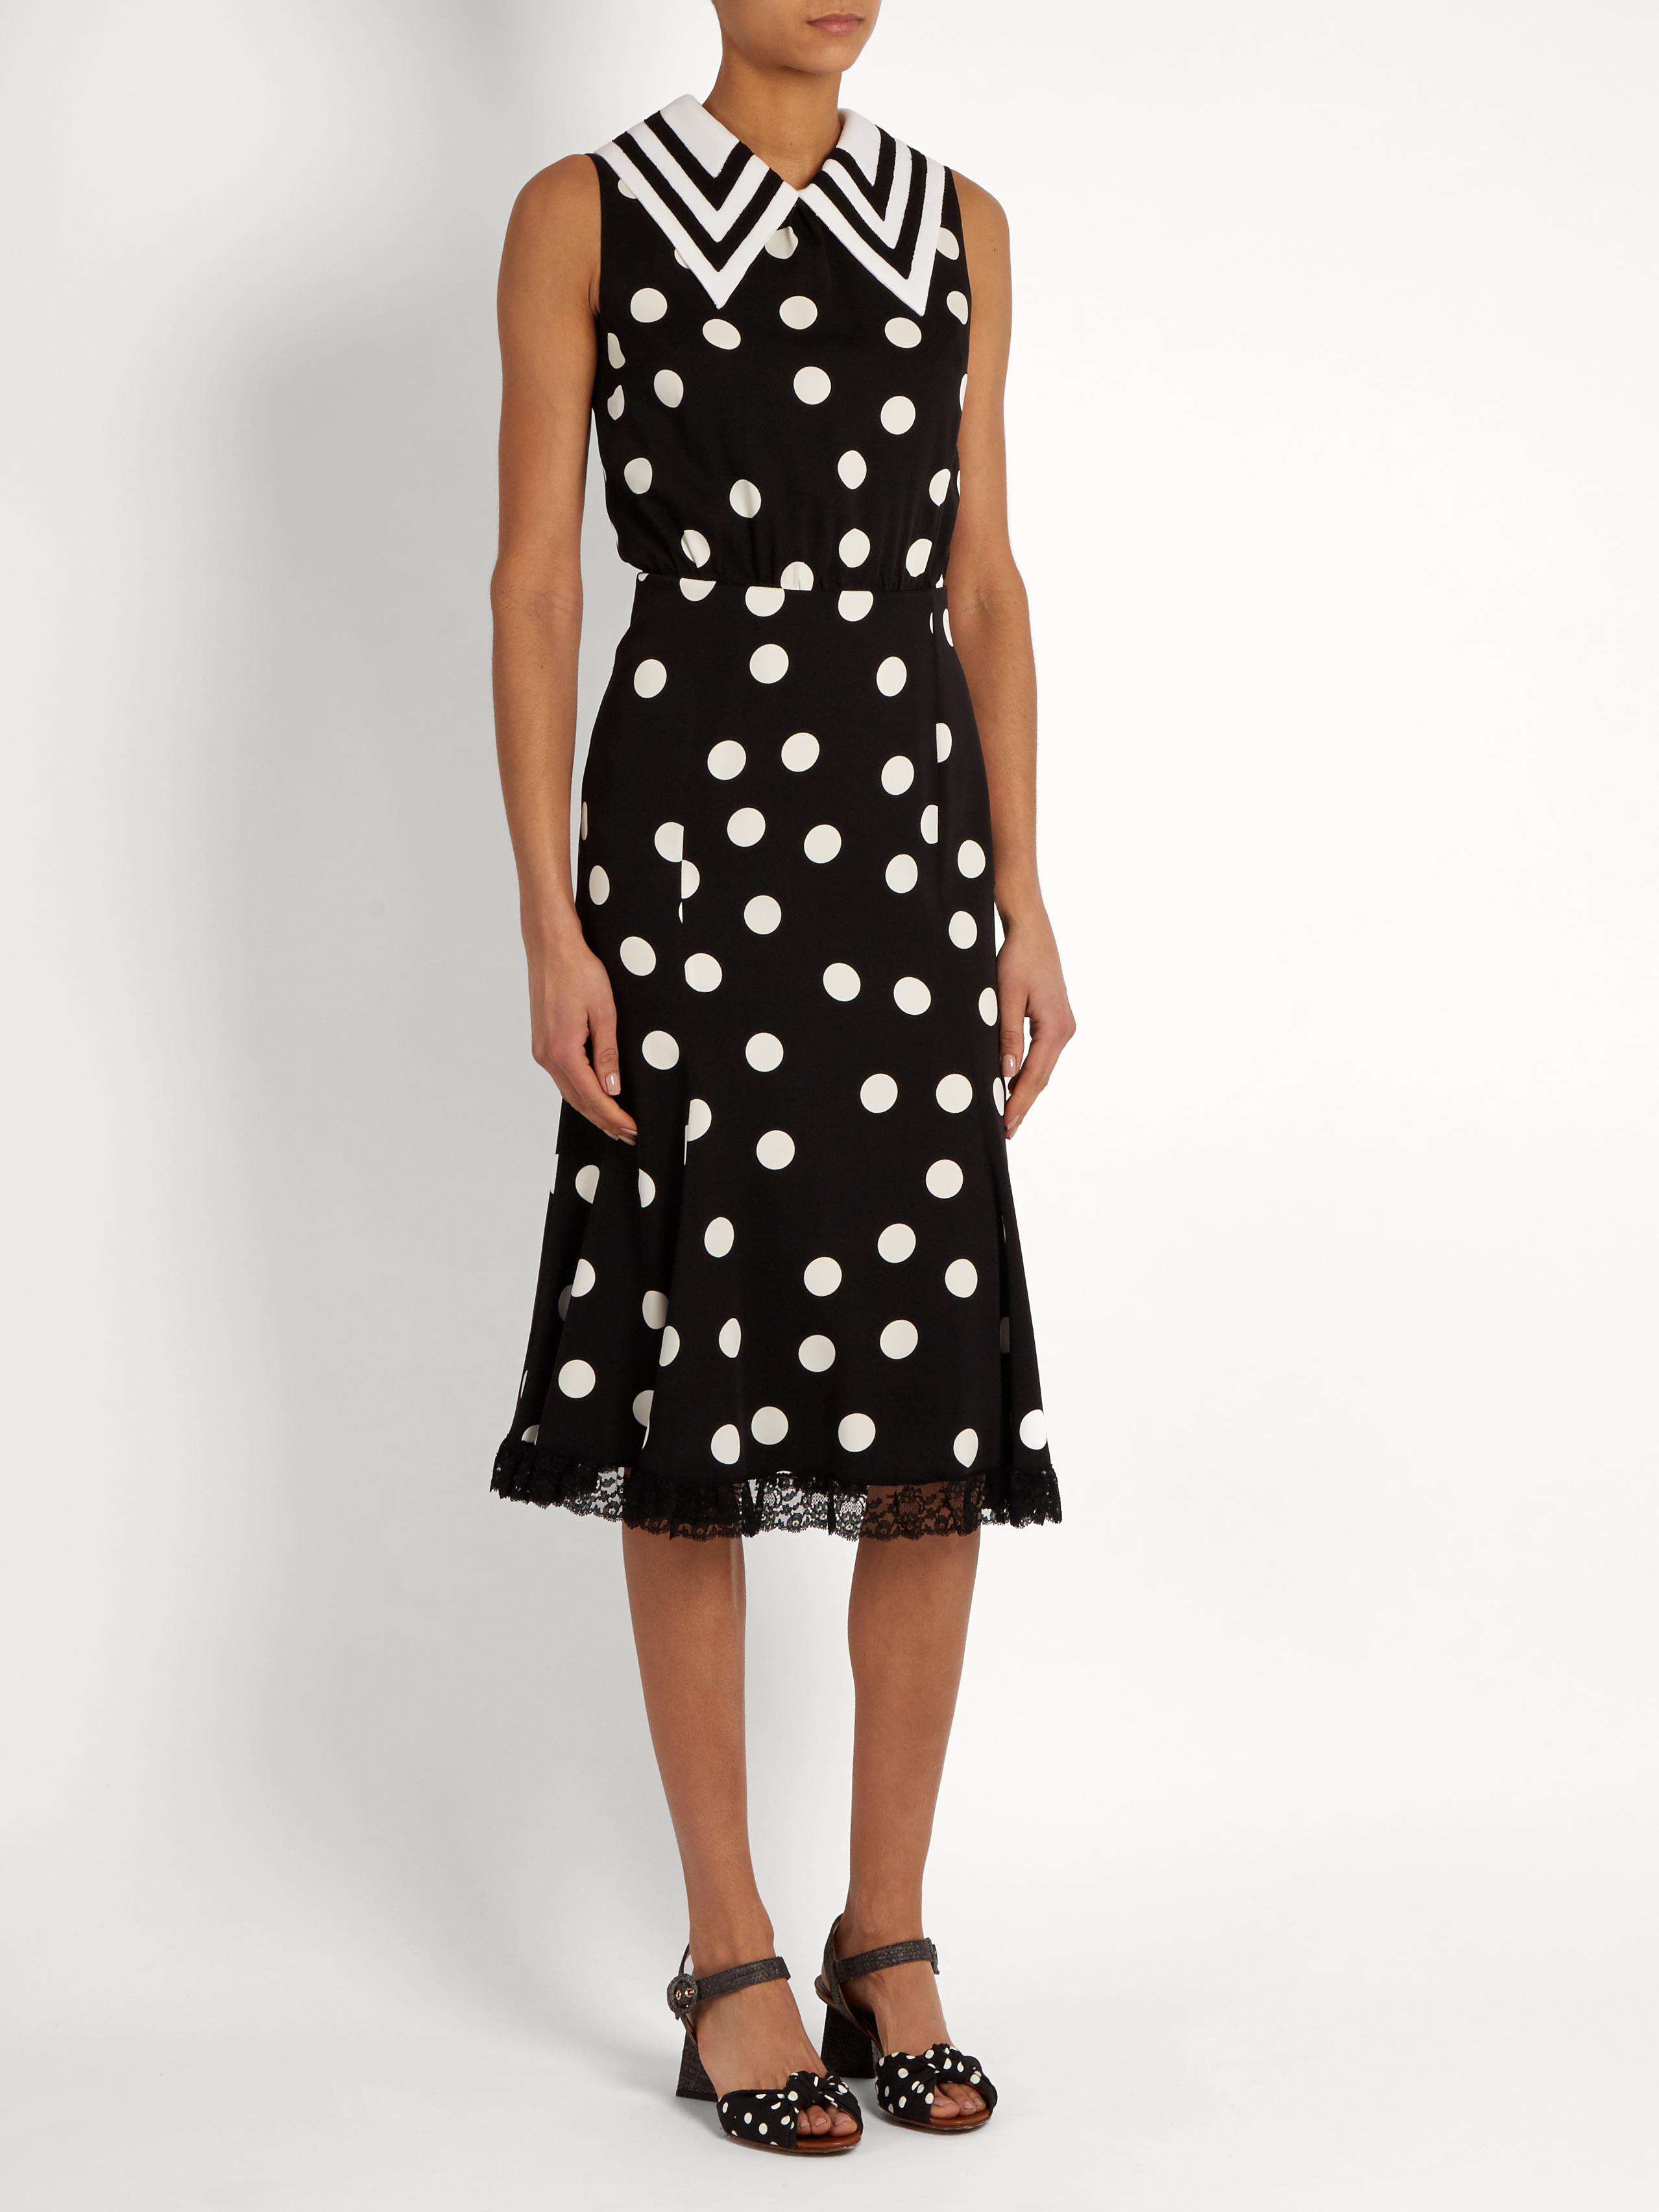 Black and white Polka Dot Dress with Collar